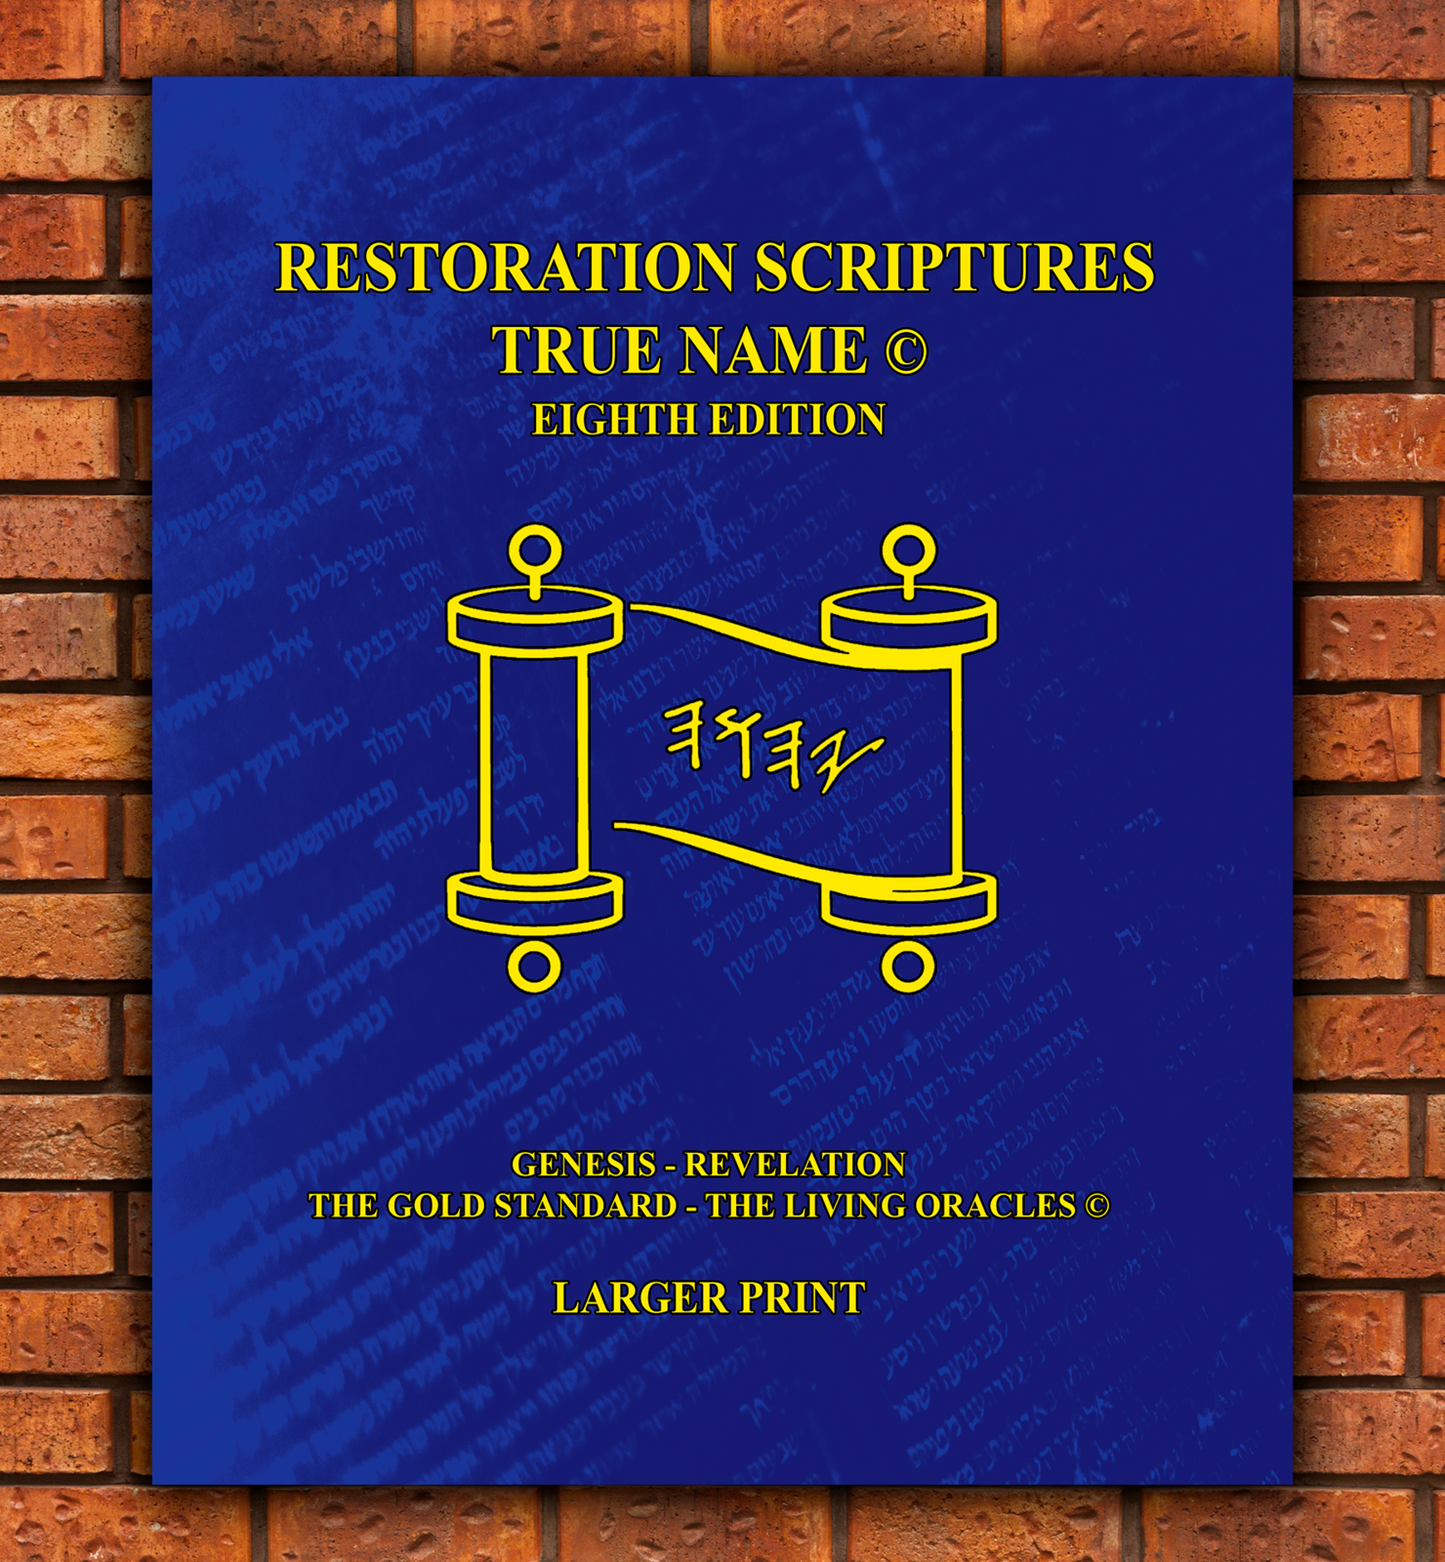 The Complete Two Pack The Restoration Scriptures True Name Eighth Larger Print Edition - Genesis-Revelation + Study Guide